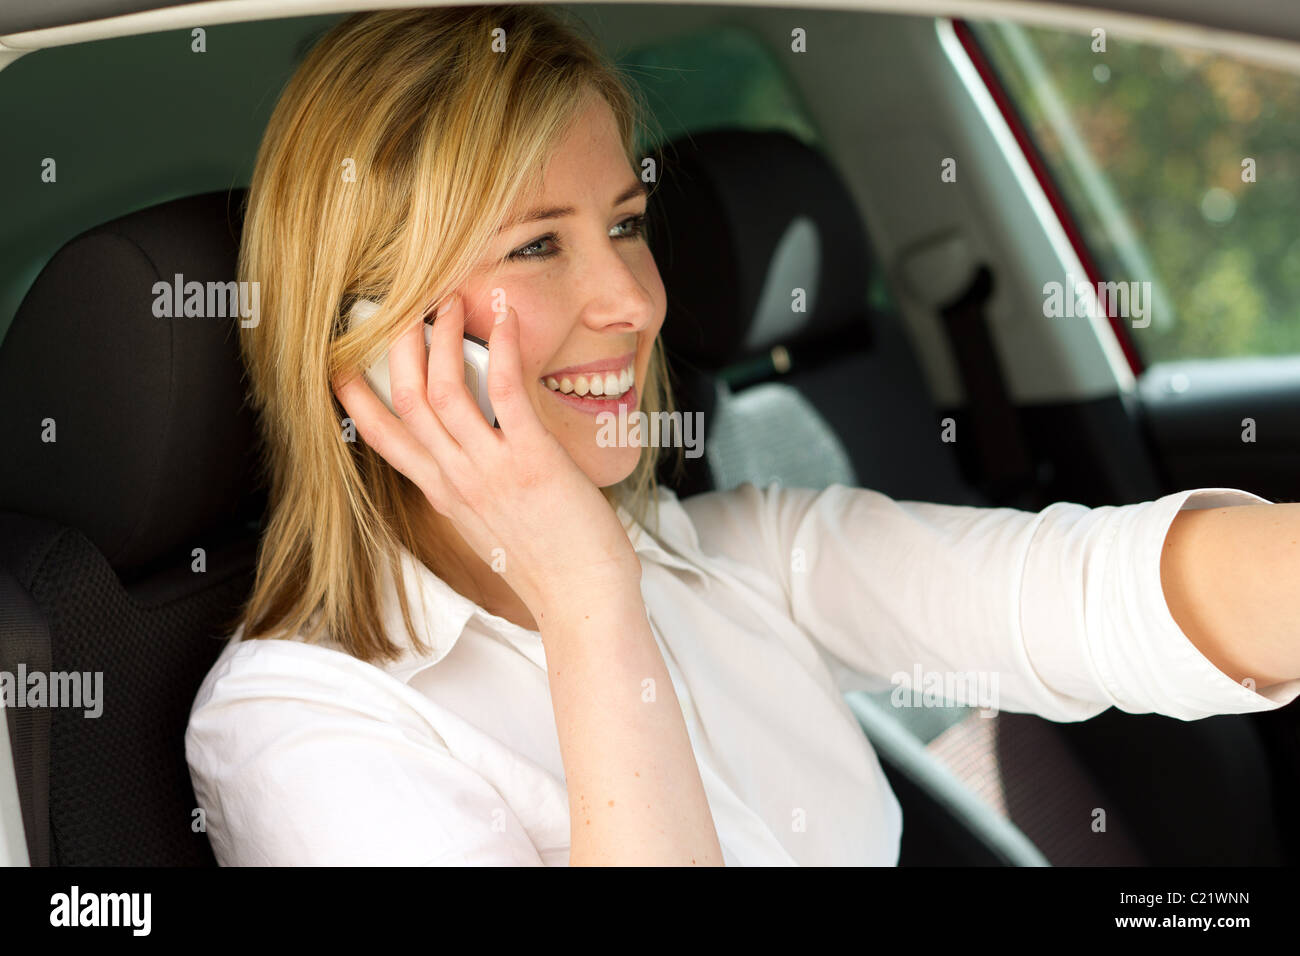 Woman chatting on phone sat in car Stock Photo